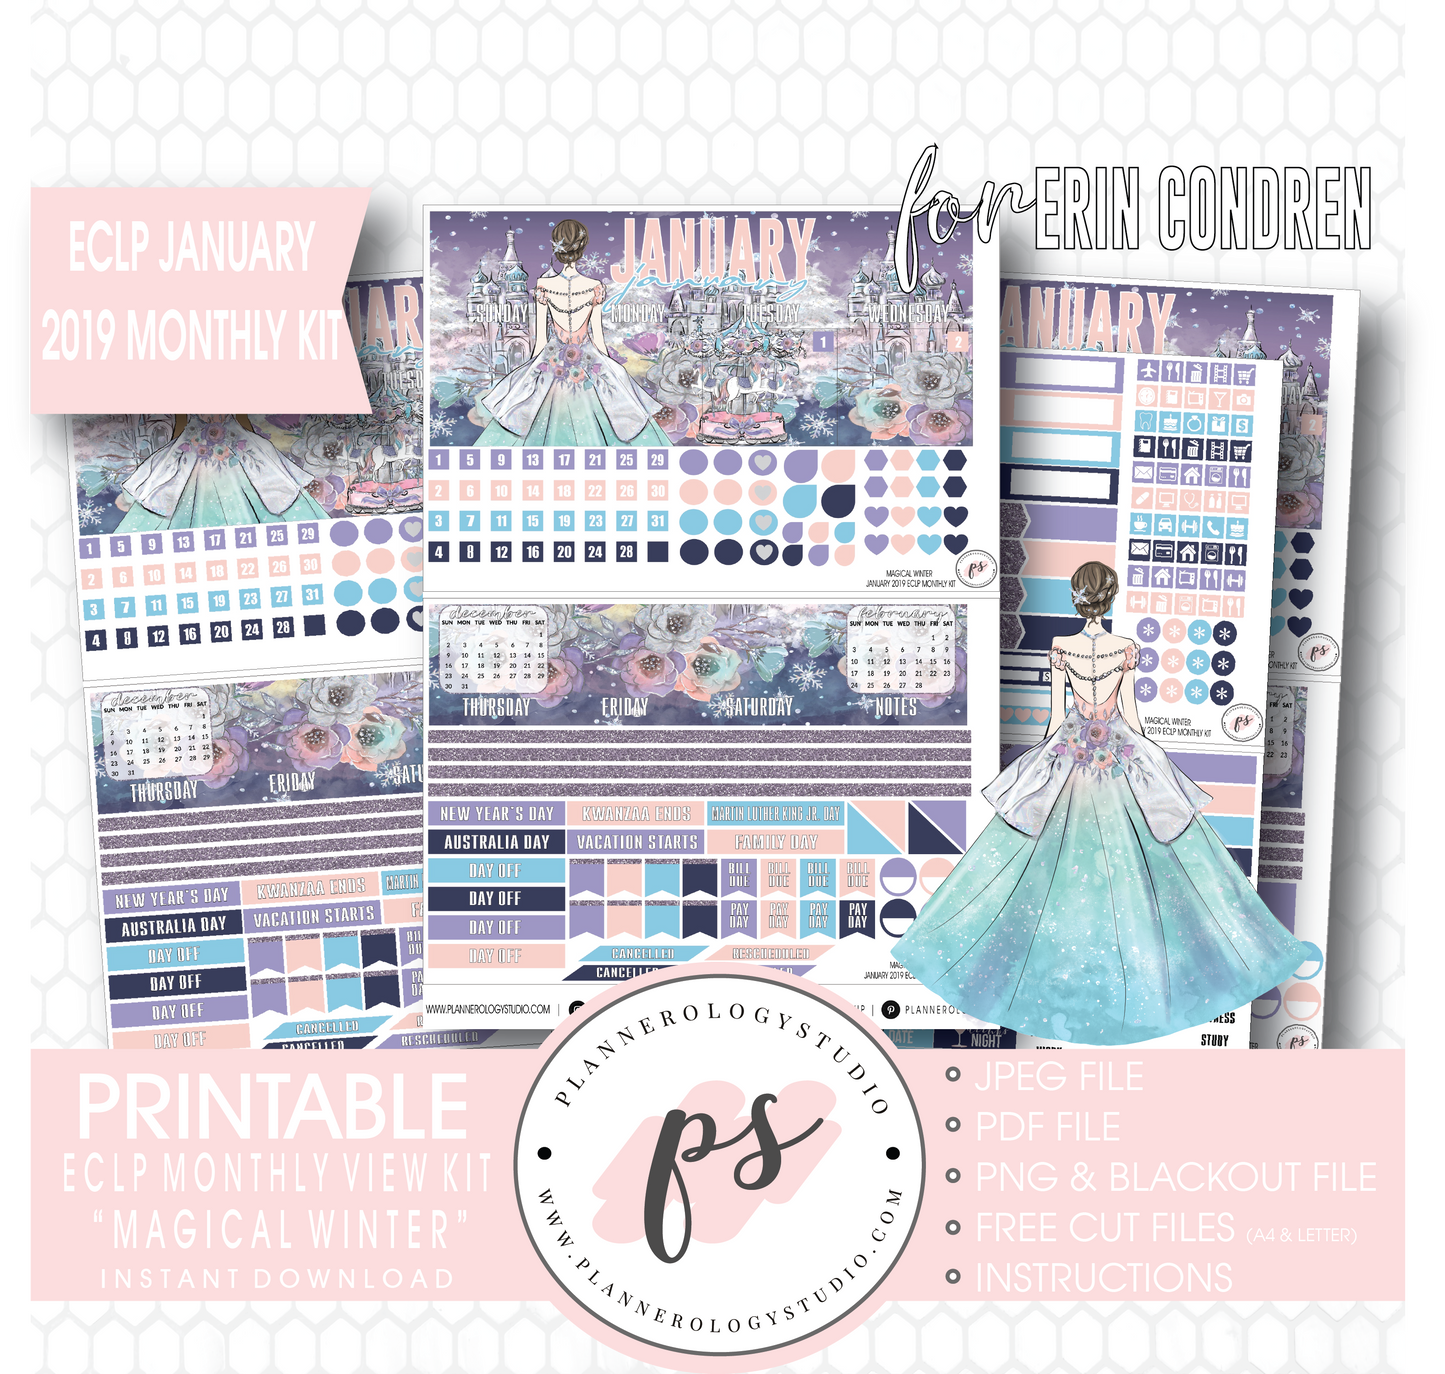 Magical Winter January 2019 Monthly View Kit Digital Printable Planner Stickers (for use with Erin Condren) - Plannerologystudio